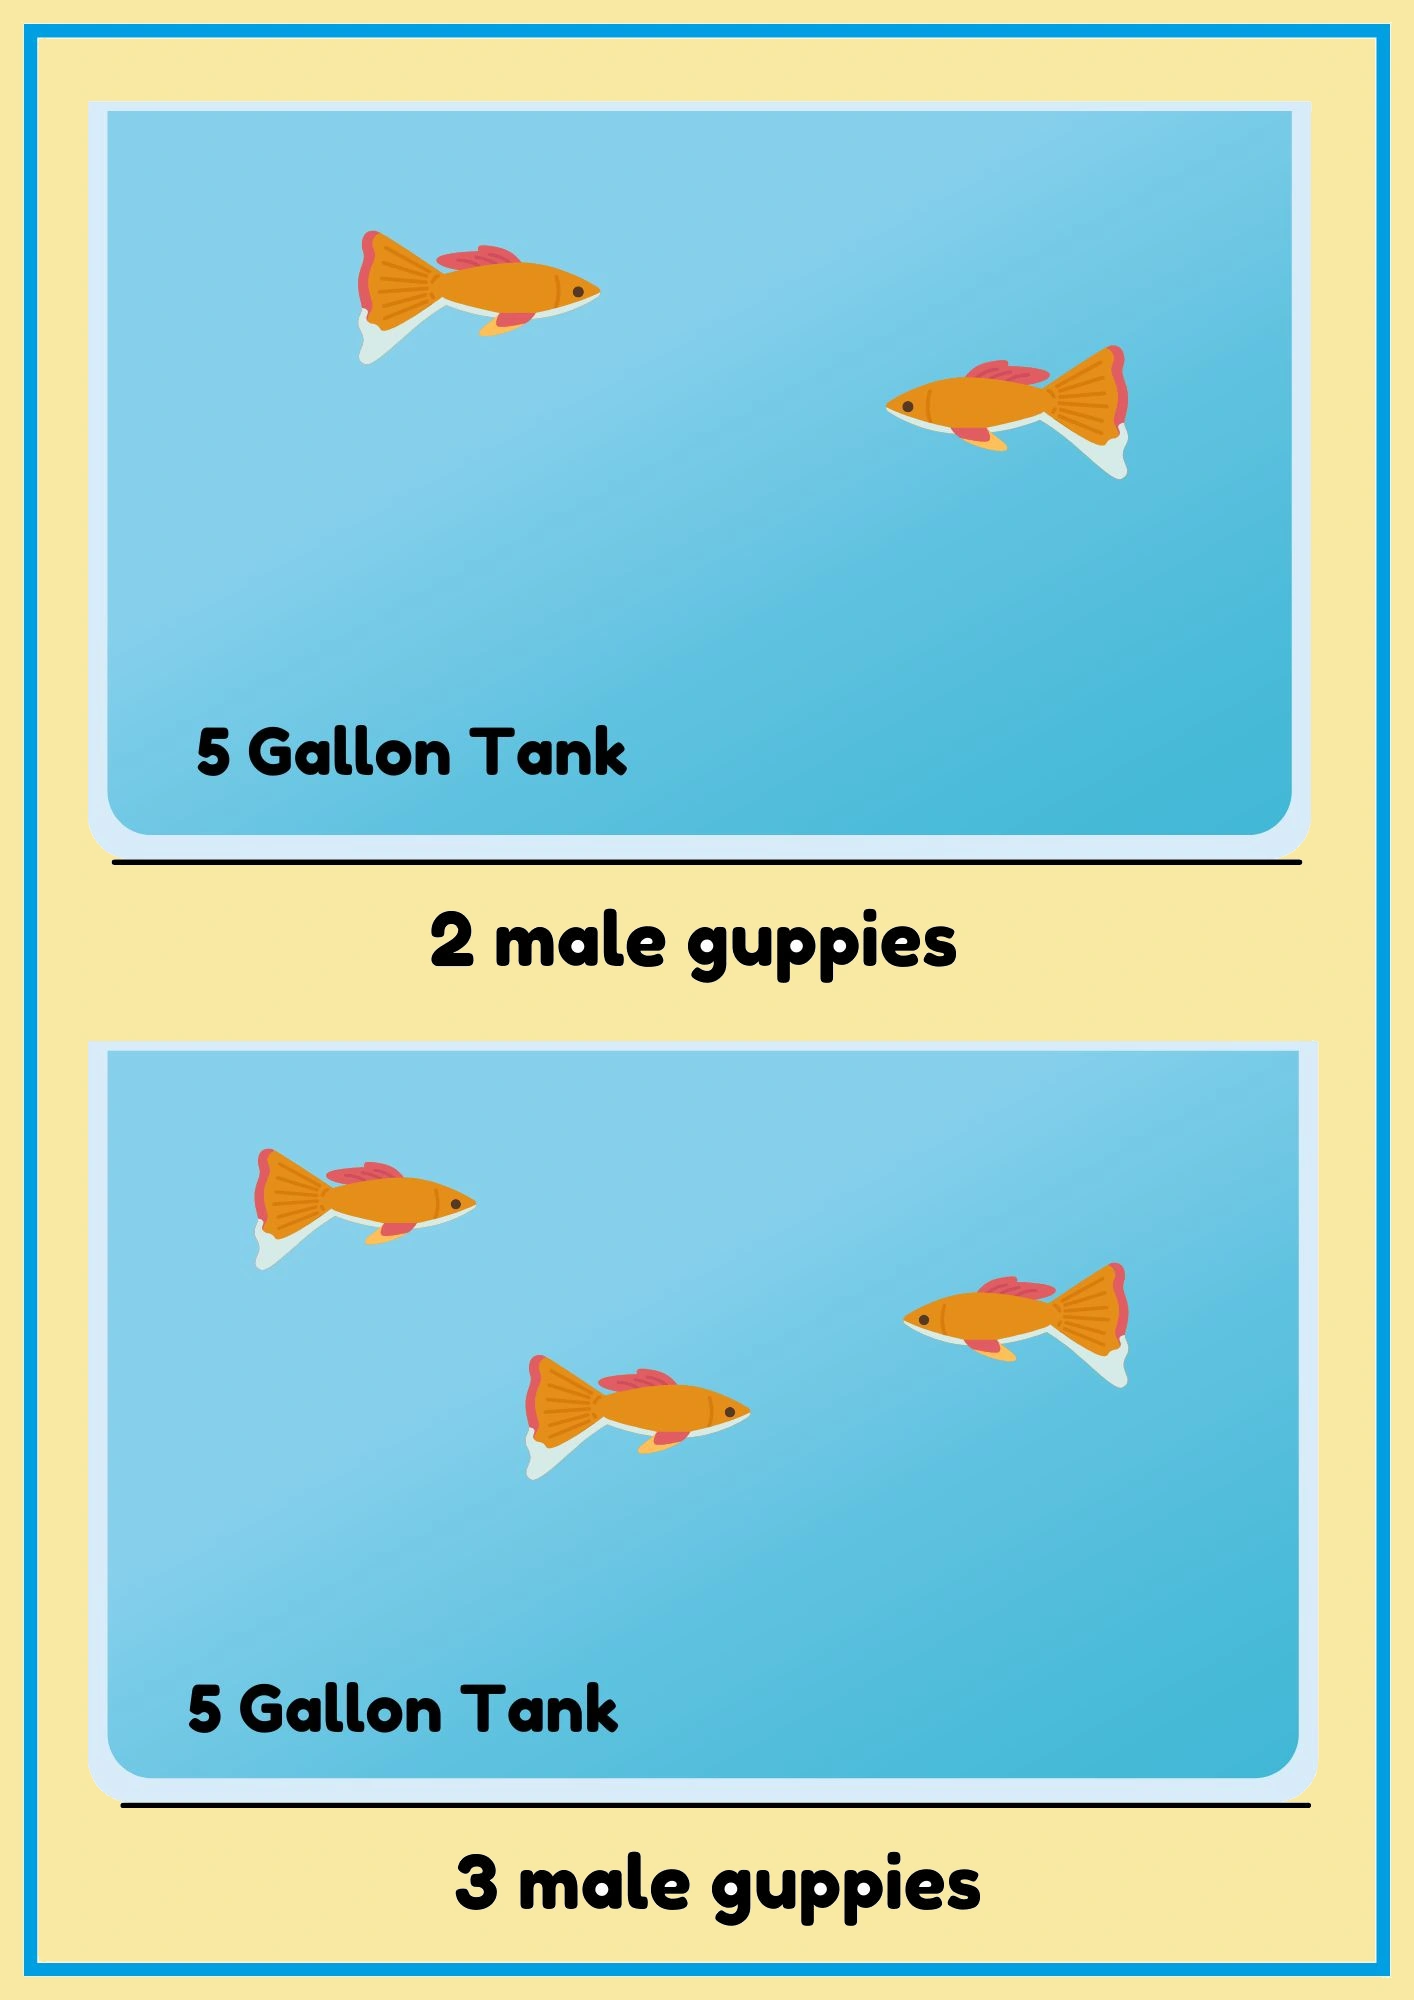 Image showing how many guppies can be kept in a 5 gallon tank. First part of the image shows 2 male guppies in 5 gallon tank and second half of the image shows 3 male guppies in the 5 gallon tank.